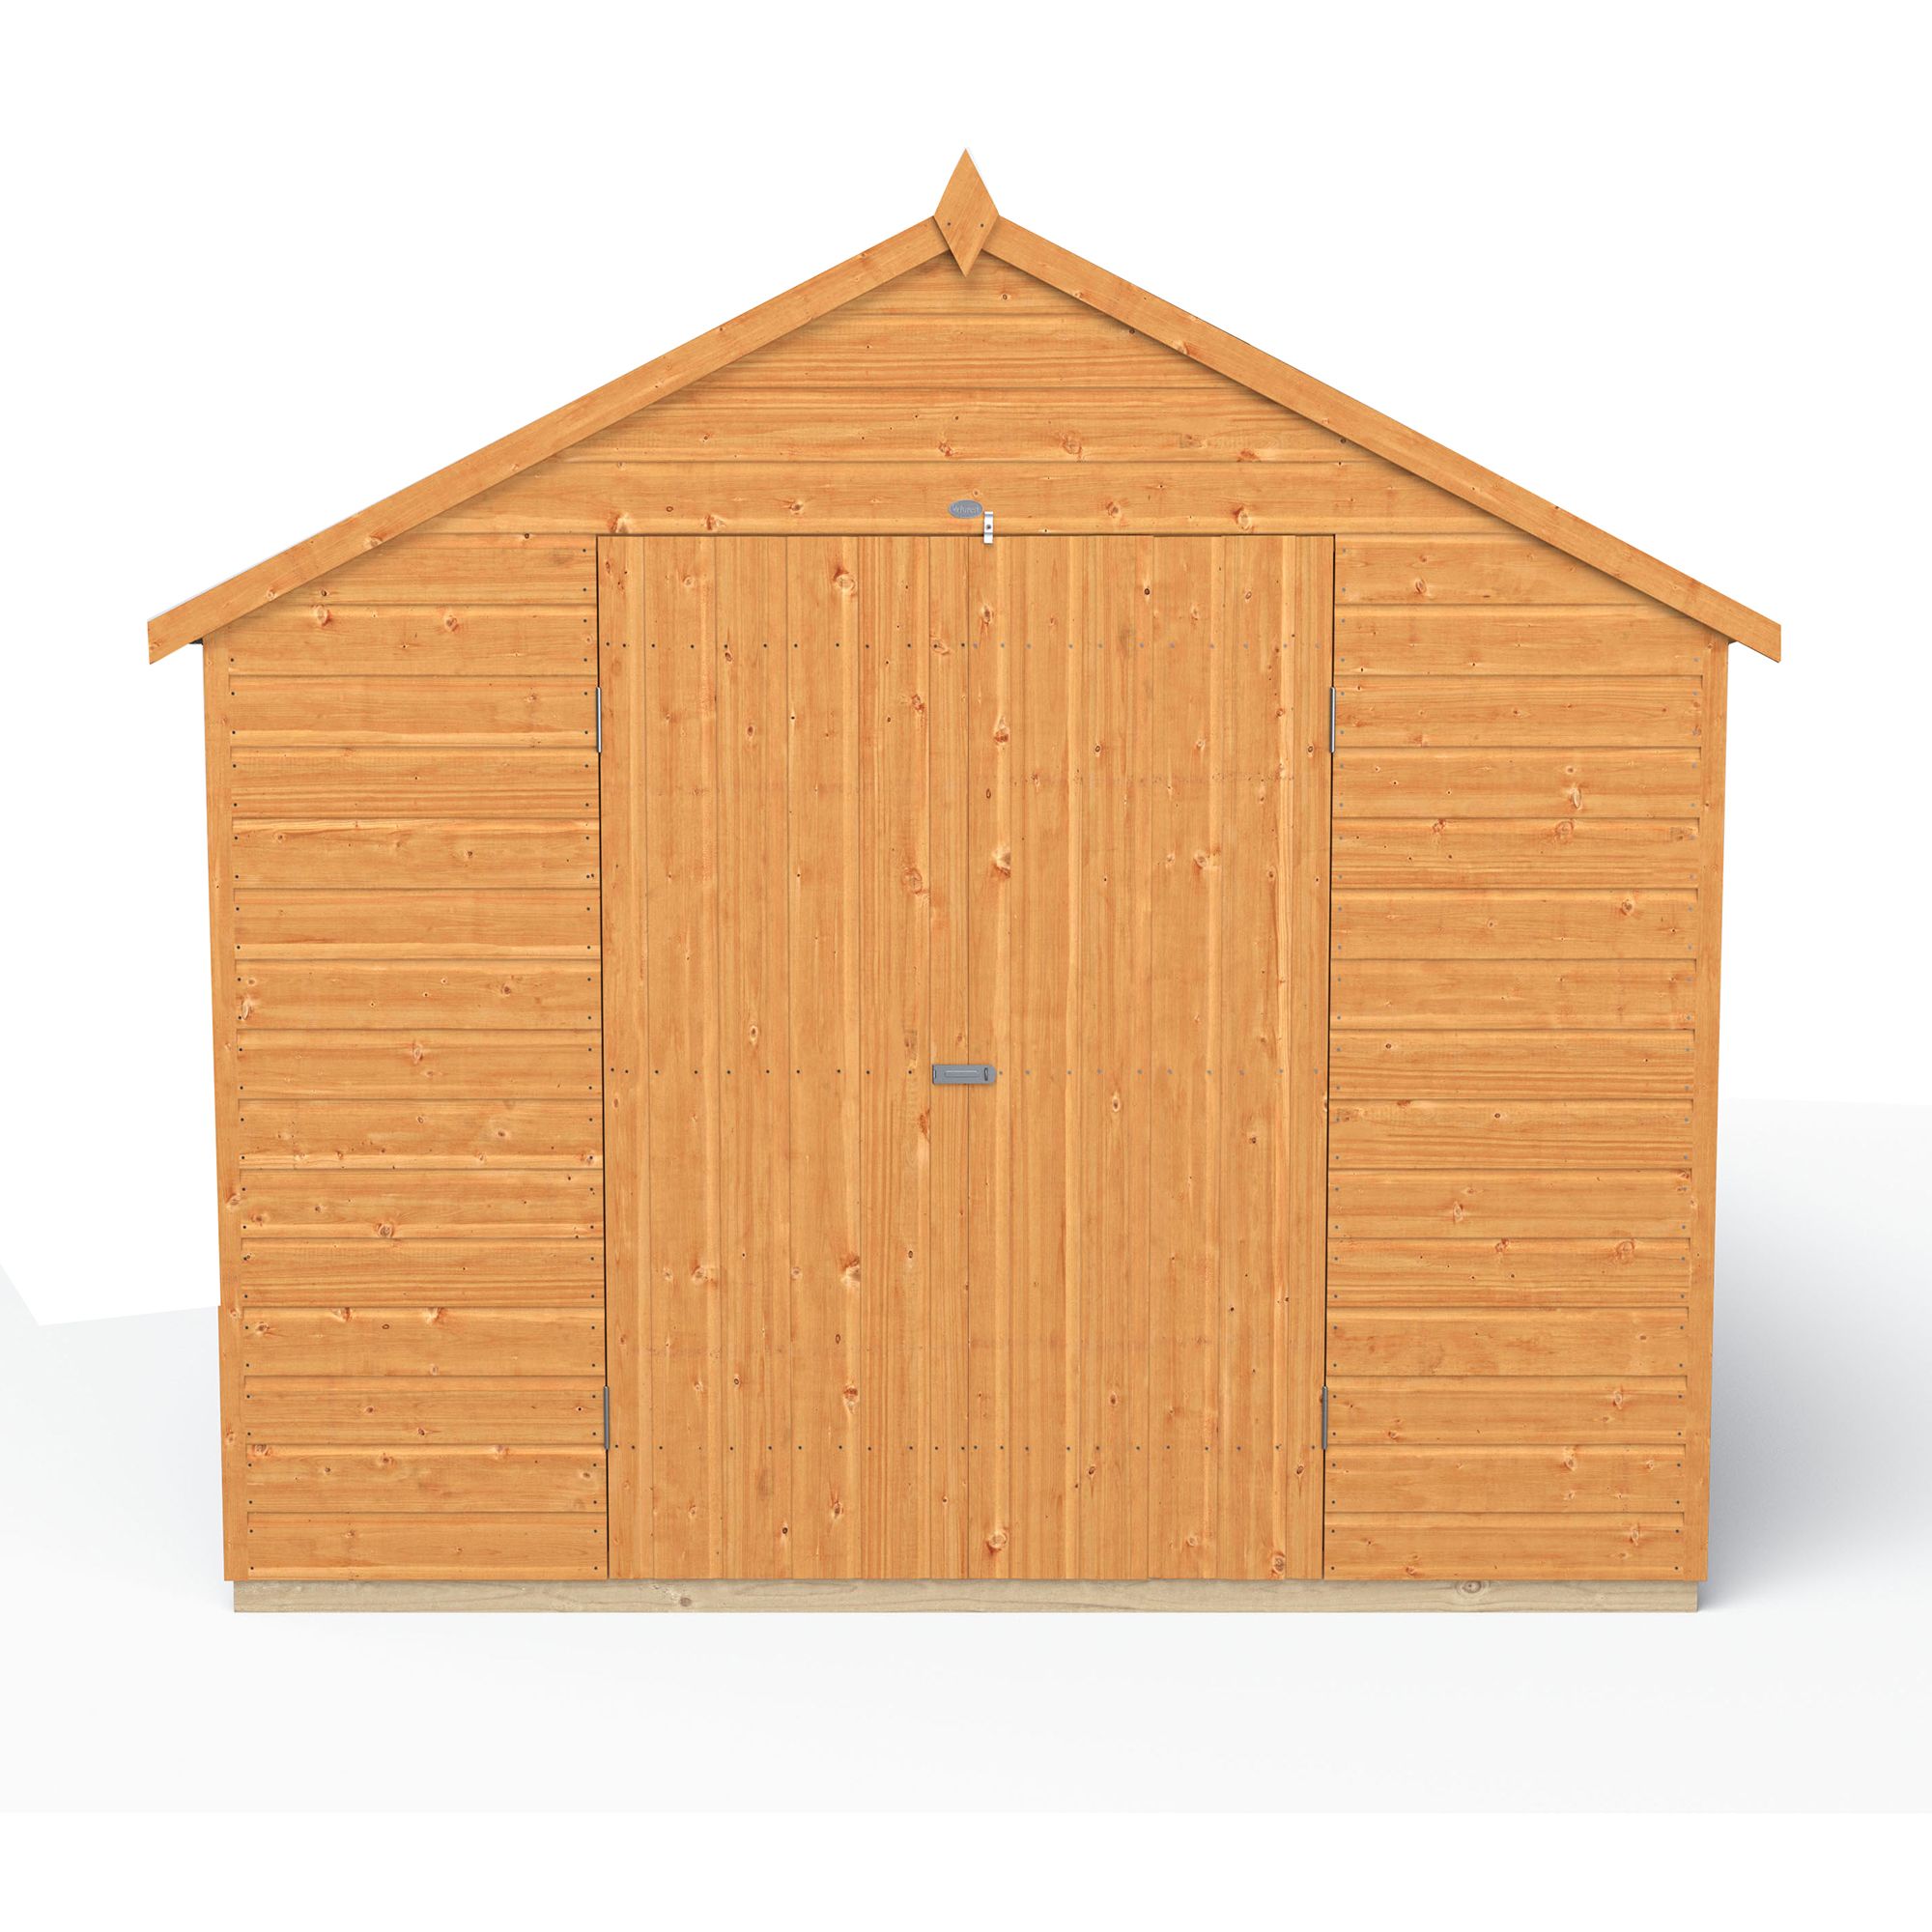 Forest Garden Shiplap 12x8 ft Apex Wooden 2 door Shed with floor & 6 windows - Assembly service included